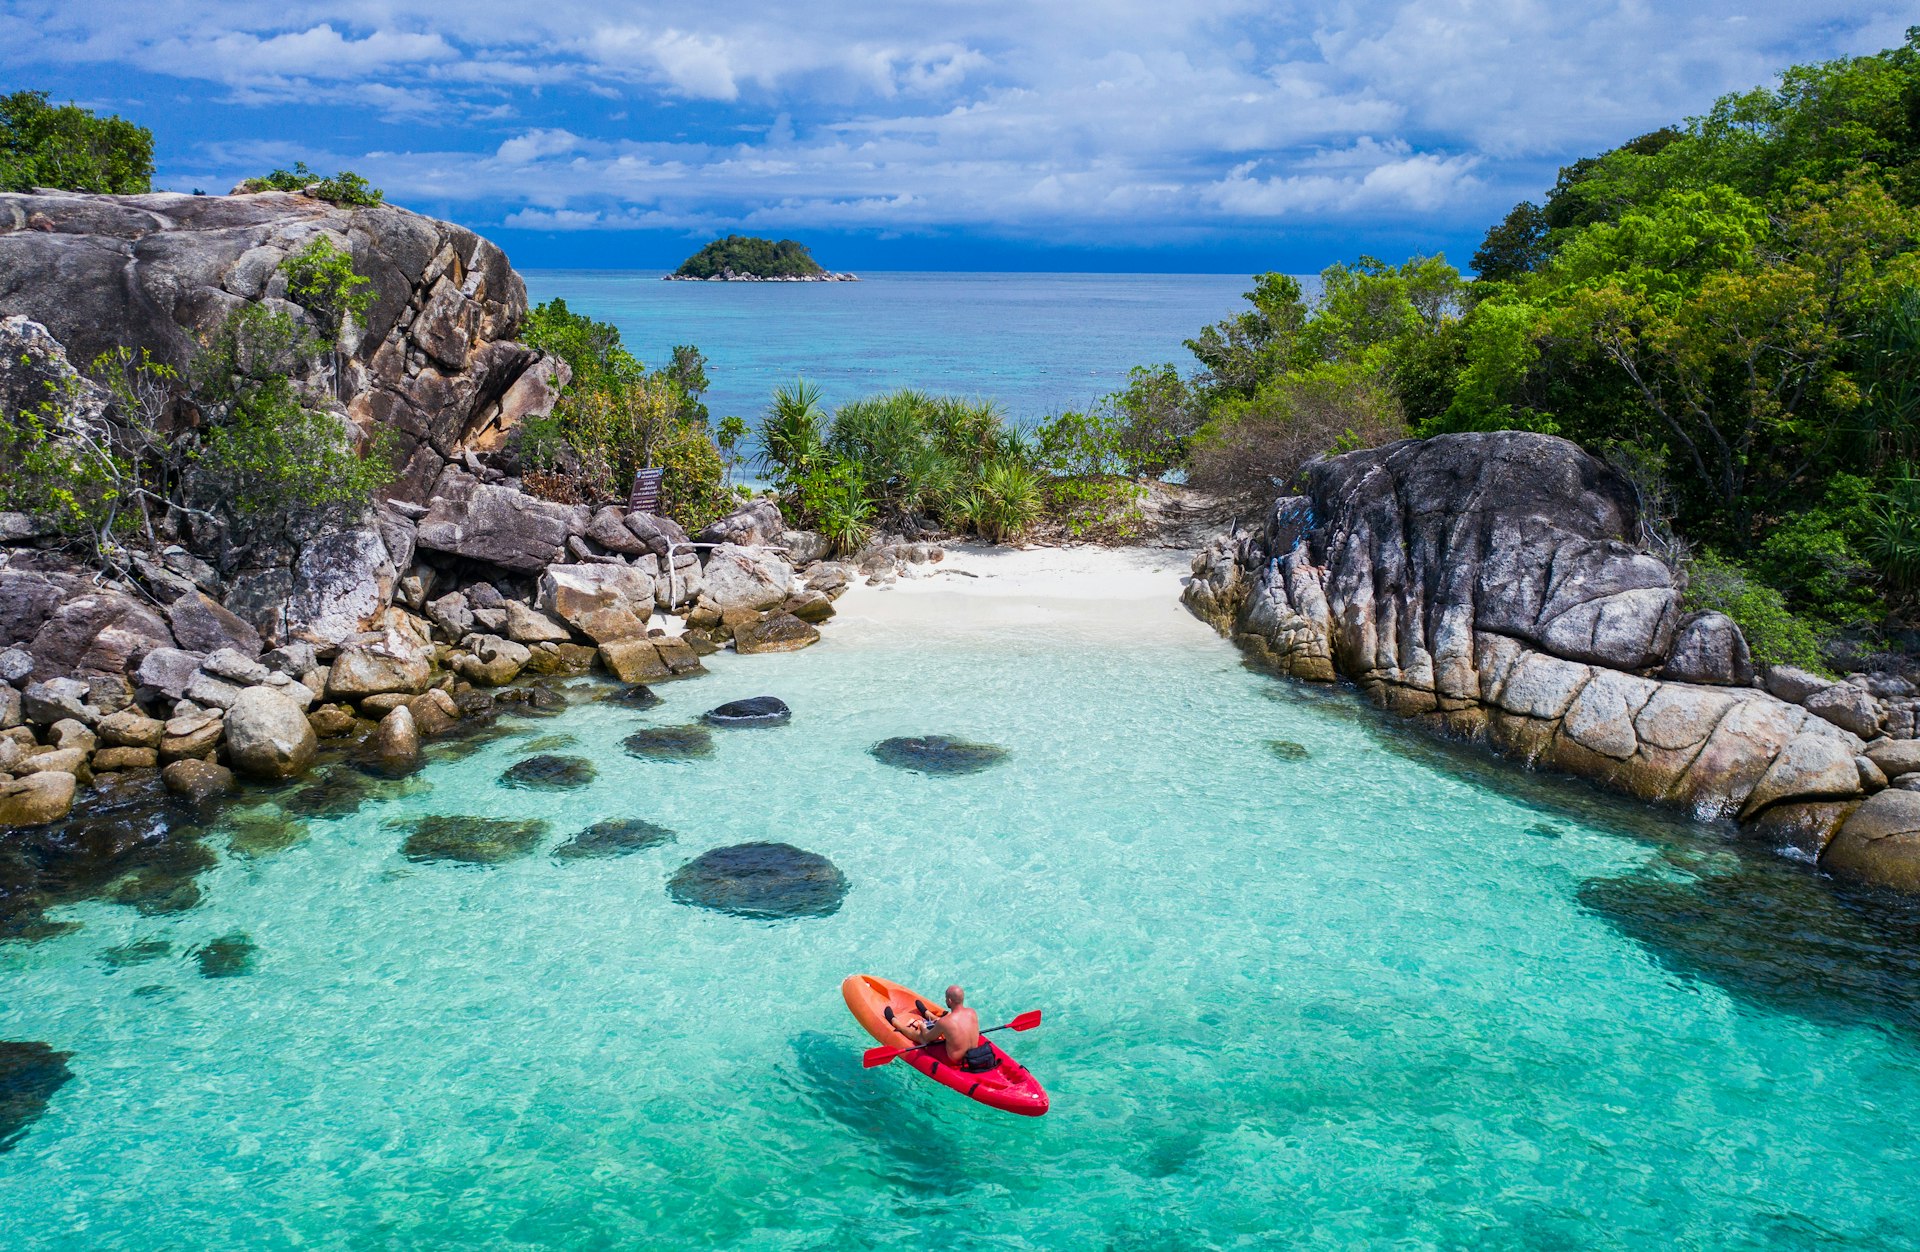 A man sits in a small red kayak floating in a turquoise bay sheltered by large rocks